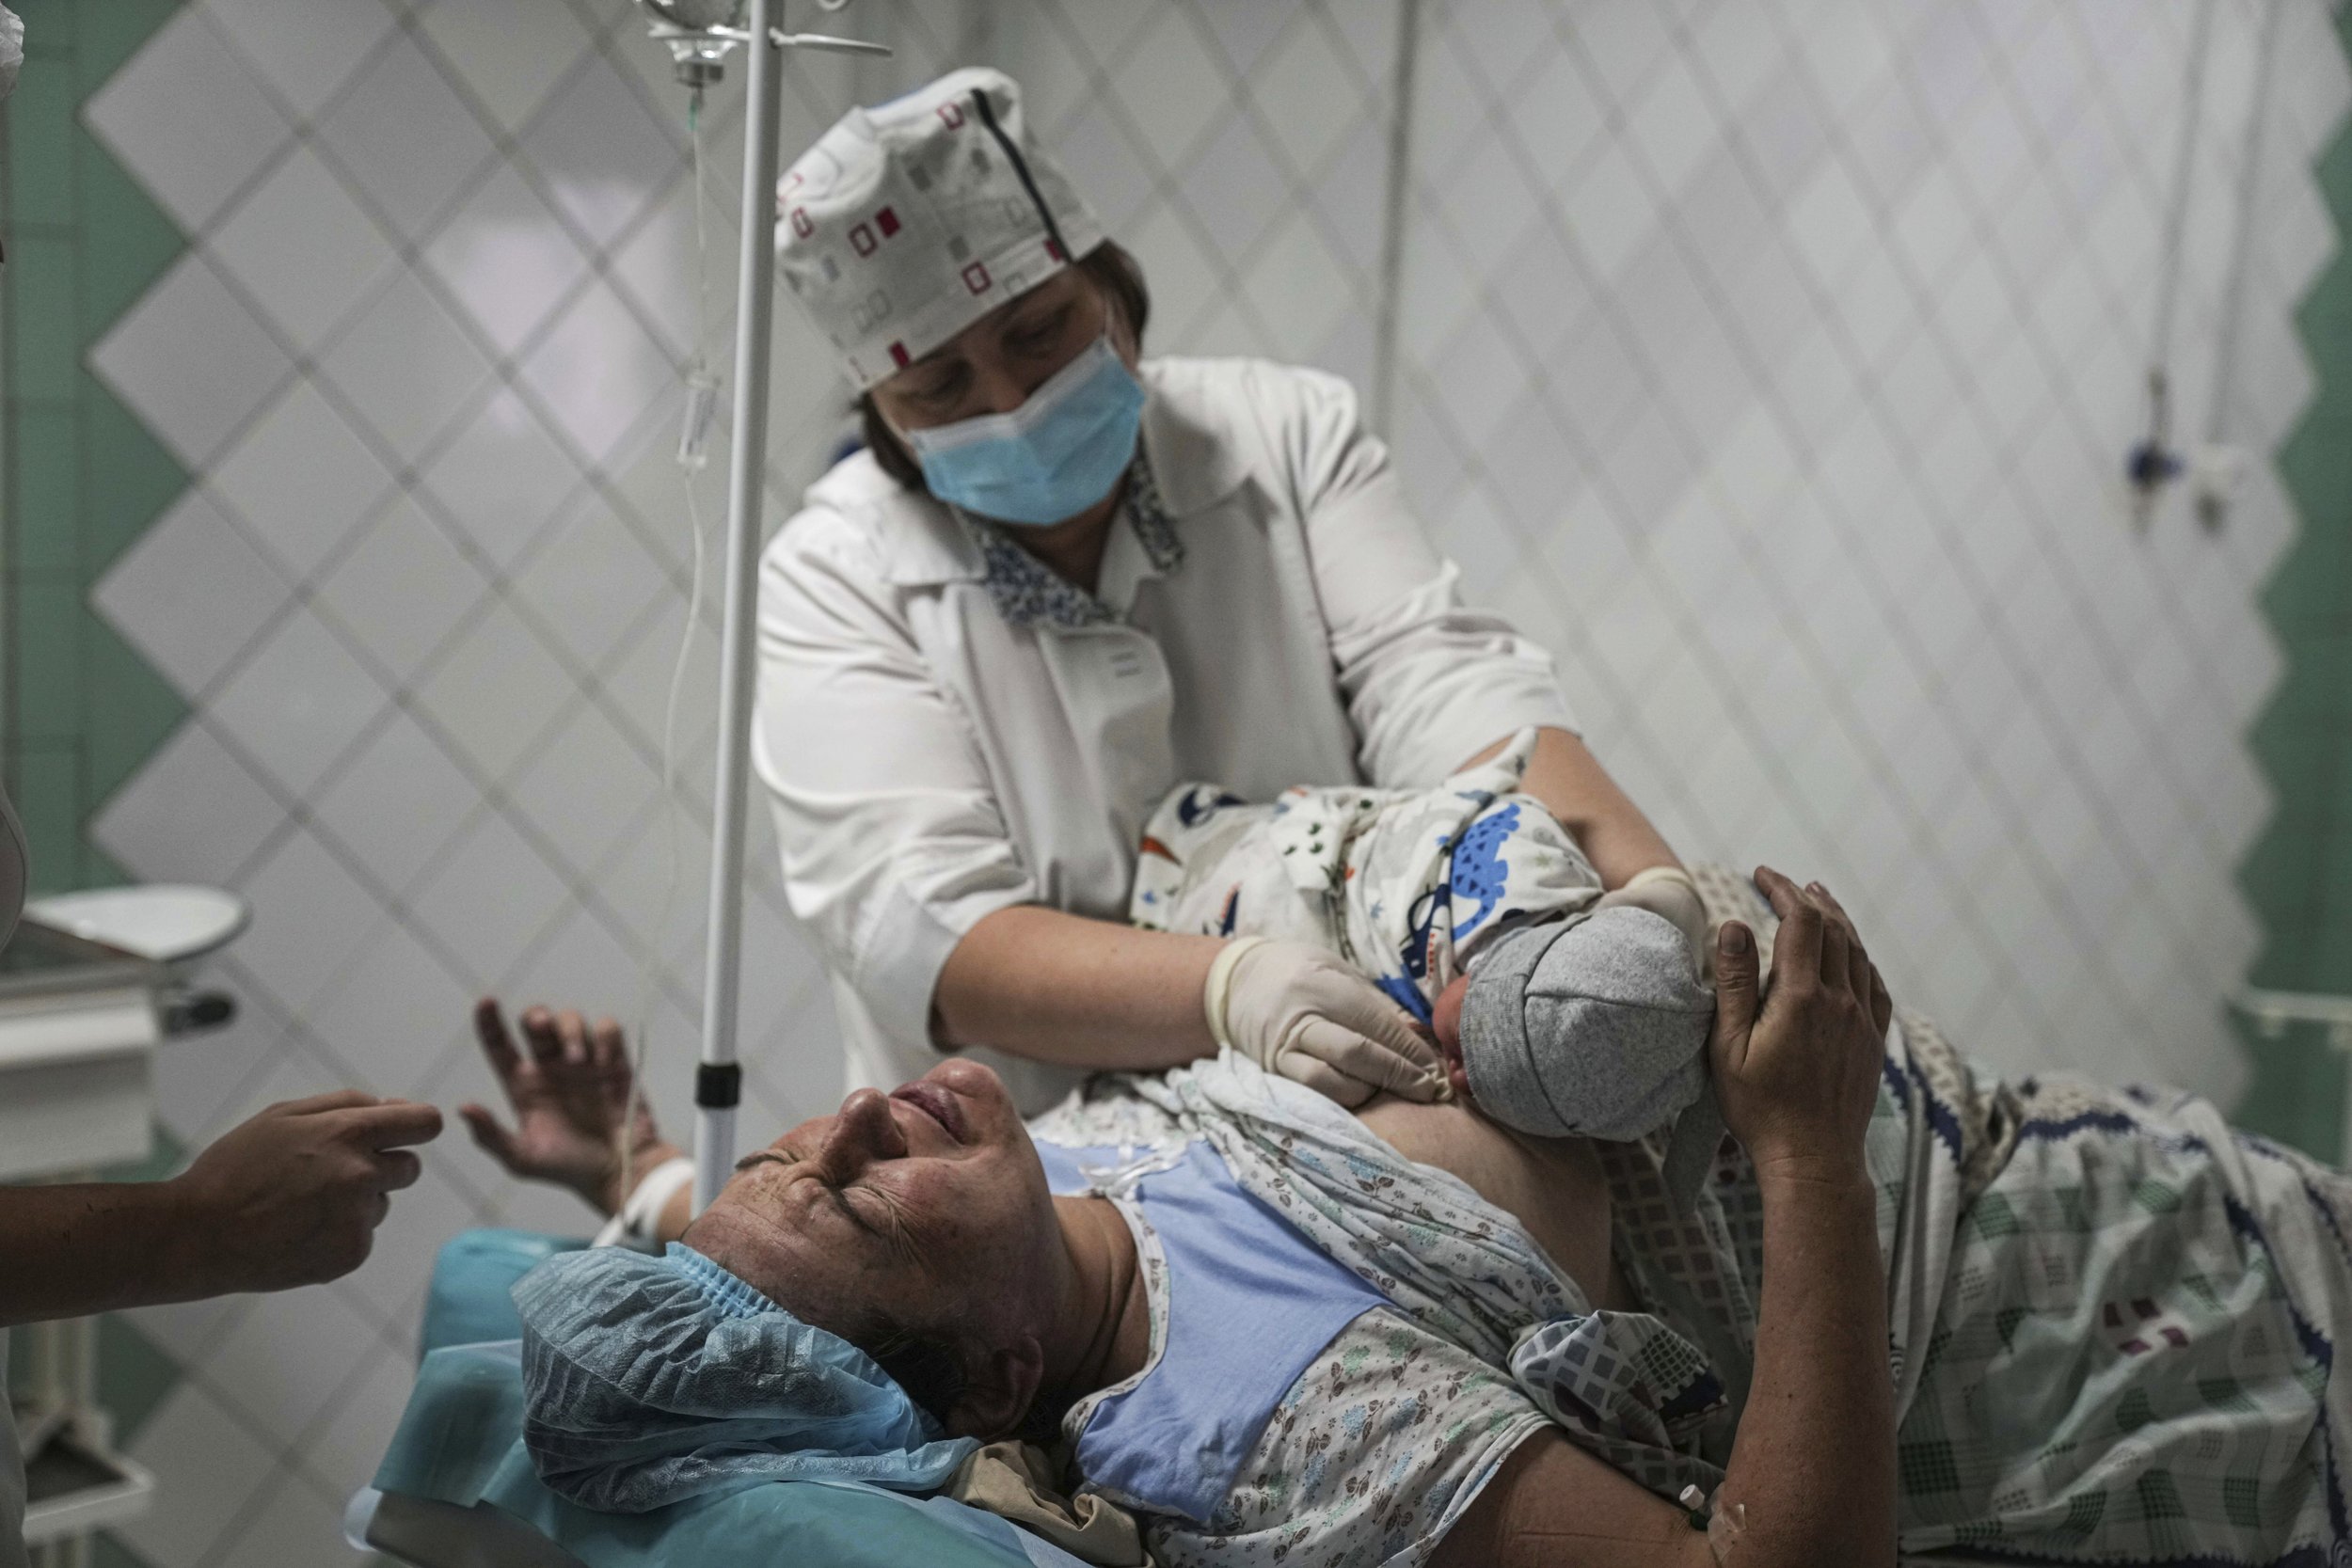  A nurse shows a newborn baby to a woman who gave birth at a maternity hospital converted into a medical ward in Mariupol, Ukraine, Tuesday, March 1, 2022. (AP Photo/Evgeniy Maloletka) 